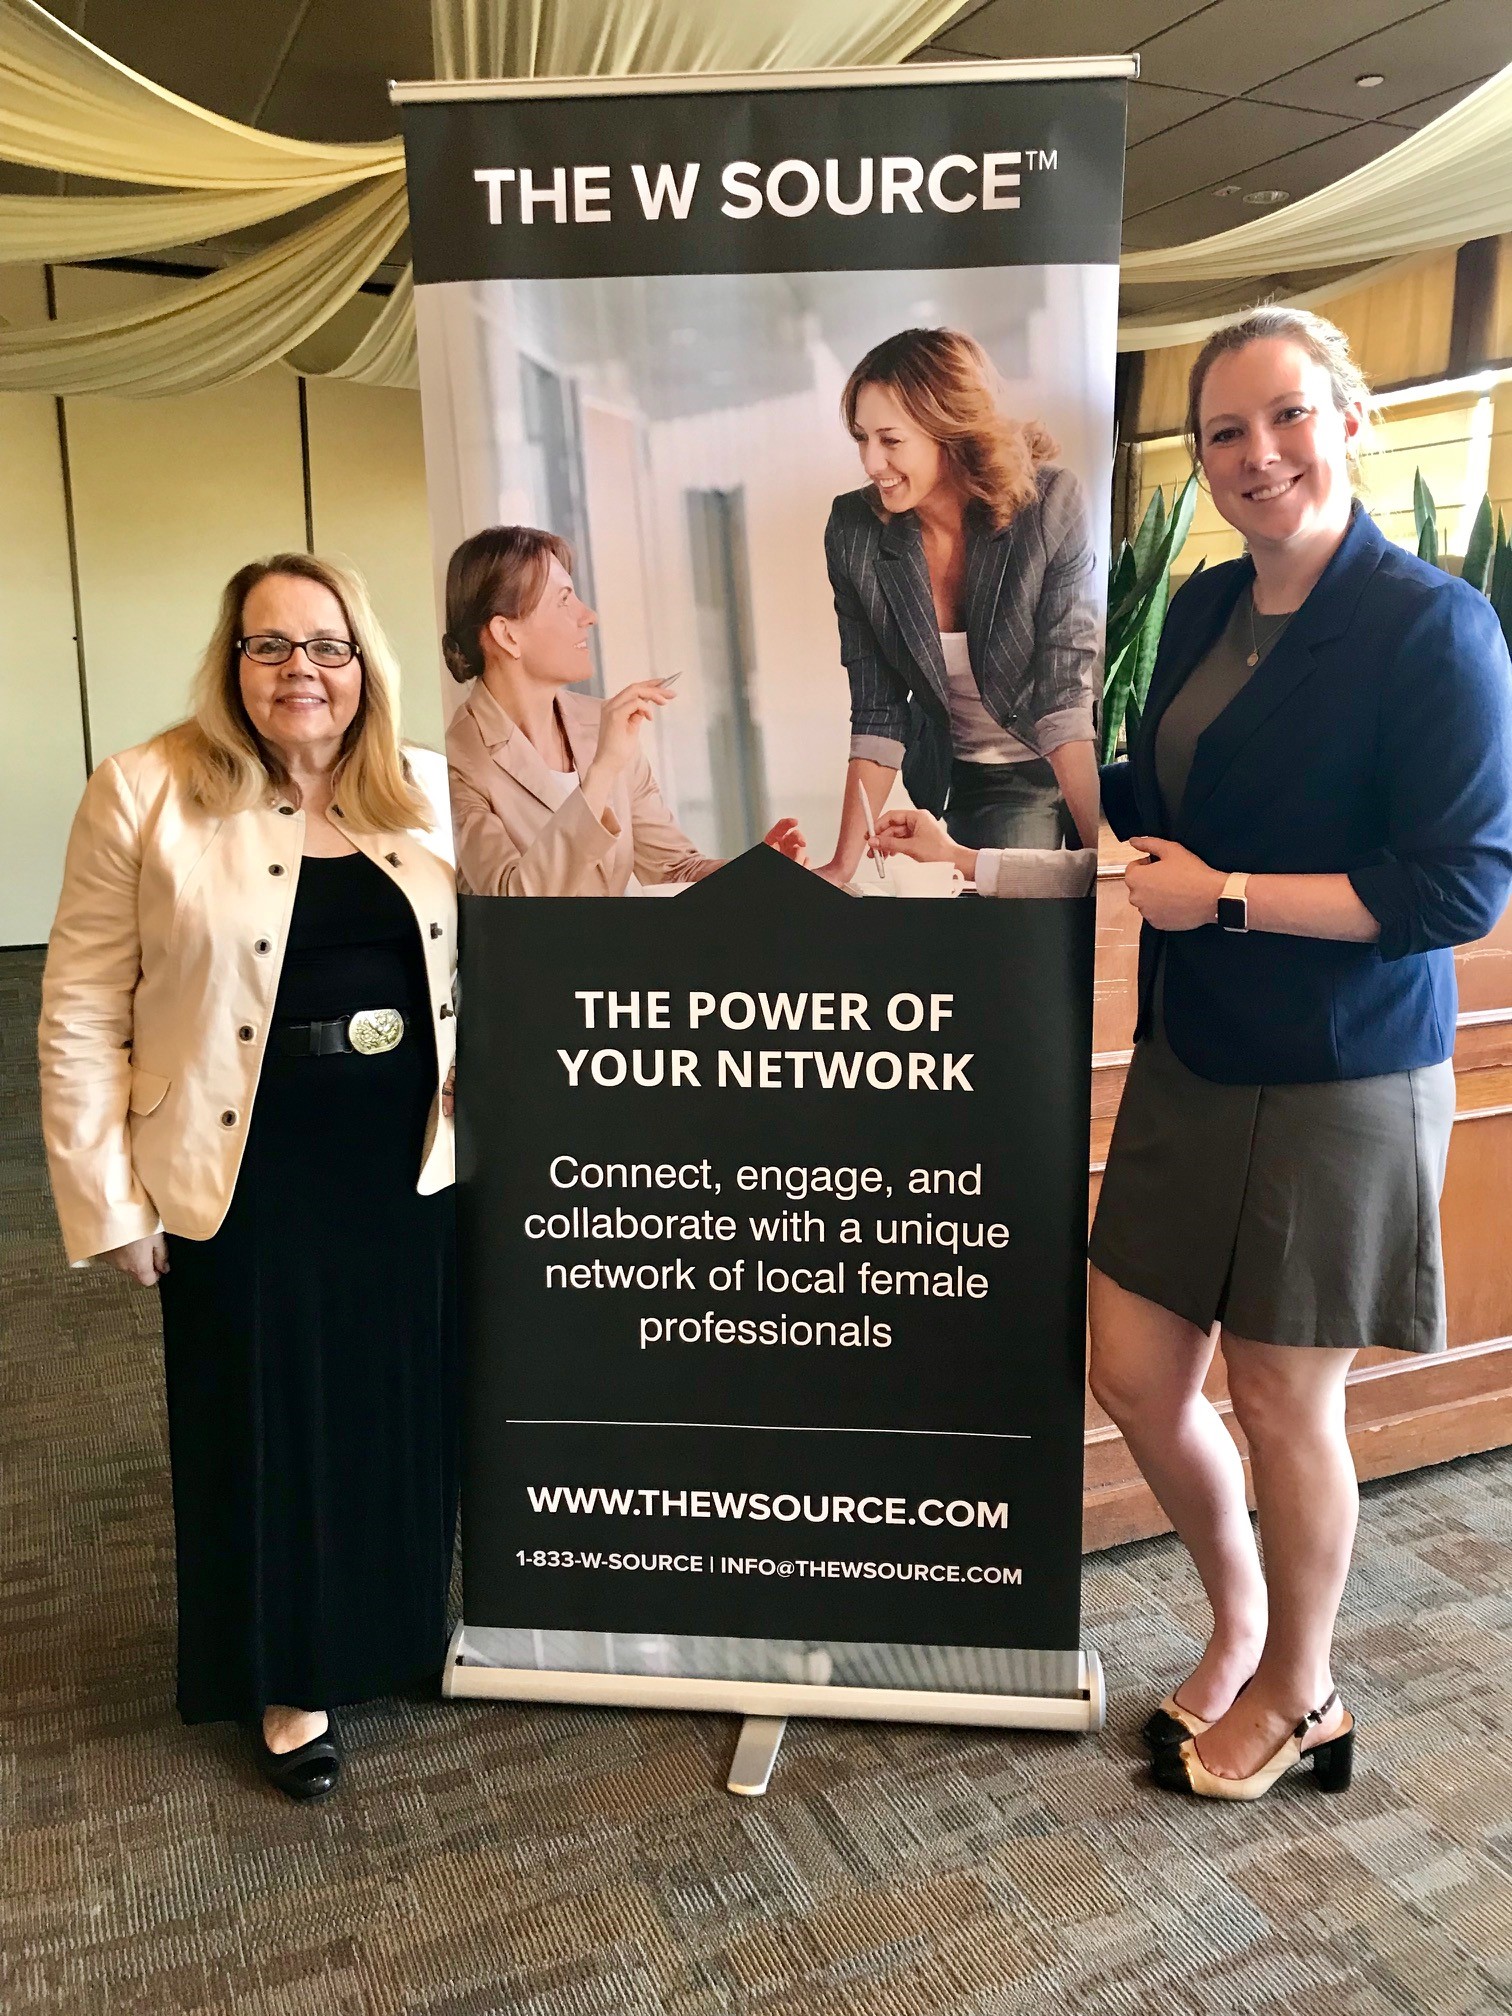  Simi Valley, Moorpark, Thousand Oaks, CA Chapter Head Barbara Orechoff (left) with cofounder of The W Source™ Hannah Buschbom (right). 